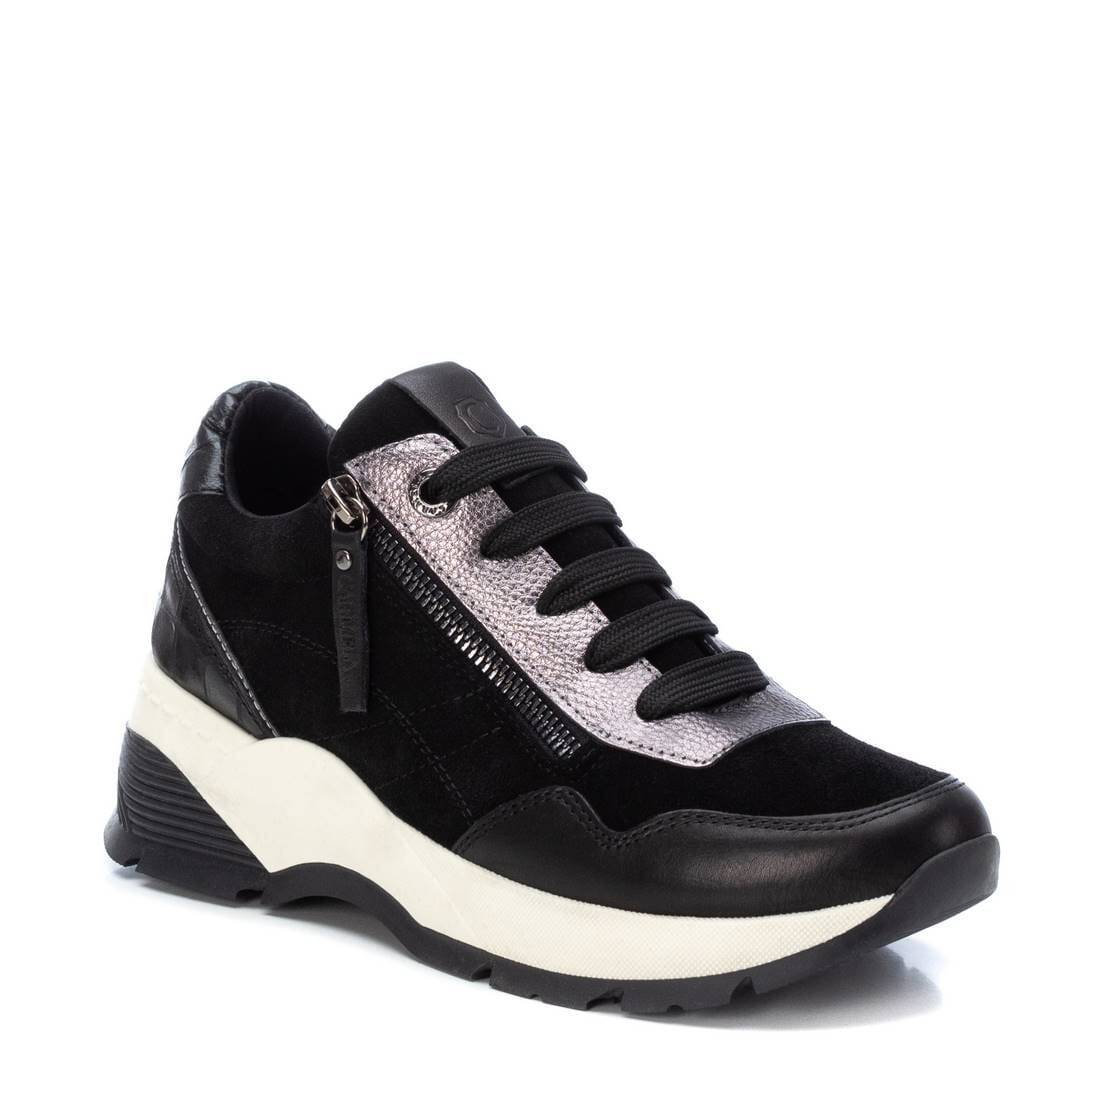 160195 Spanish Collection Leather sneakers with cushion sole in Black/Tan sneakers Sam Star shoes 